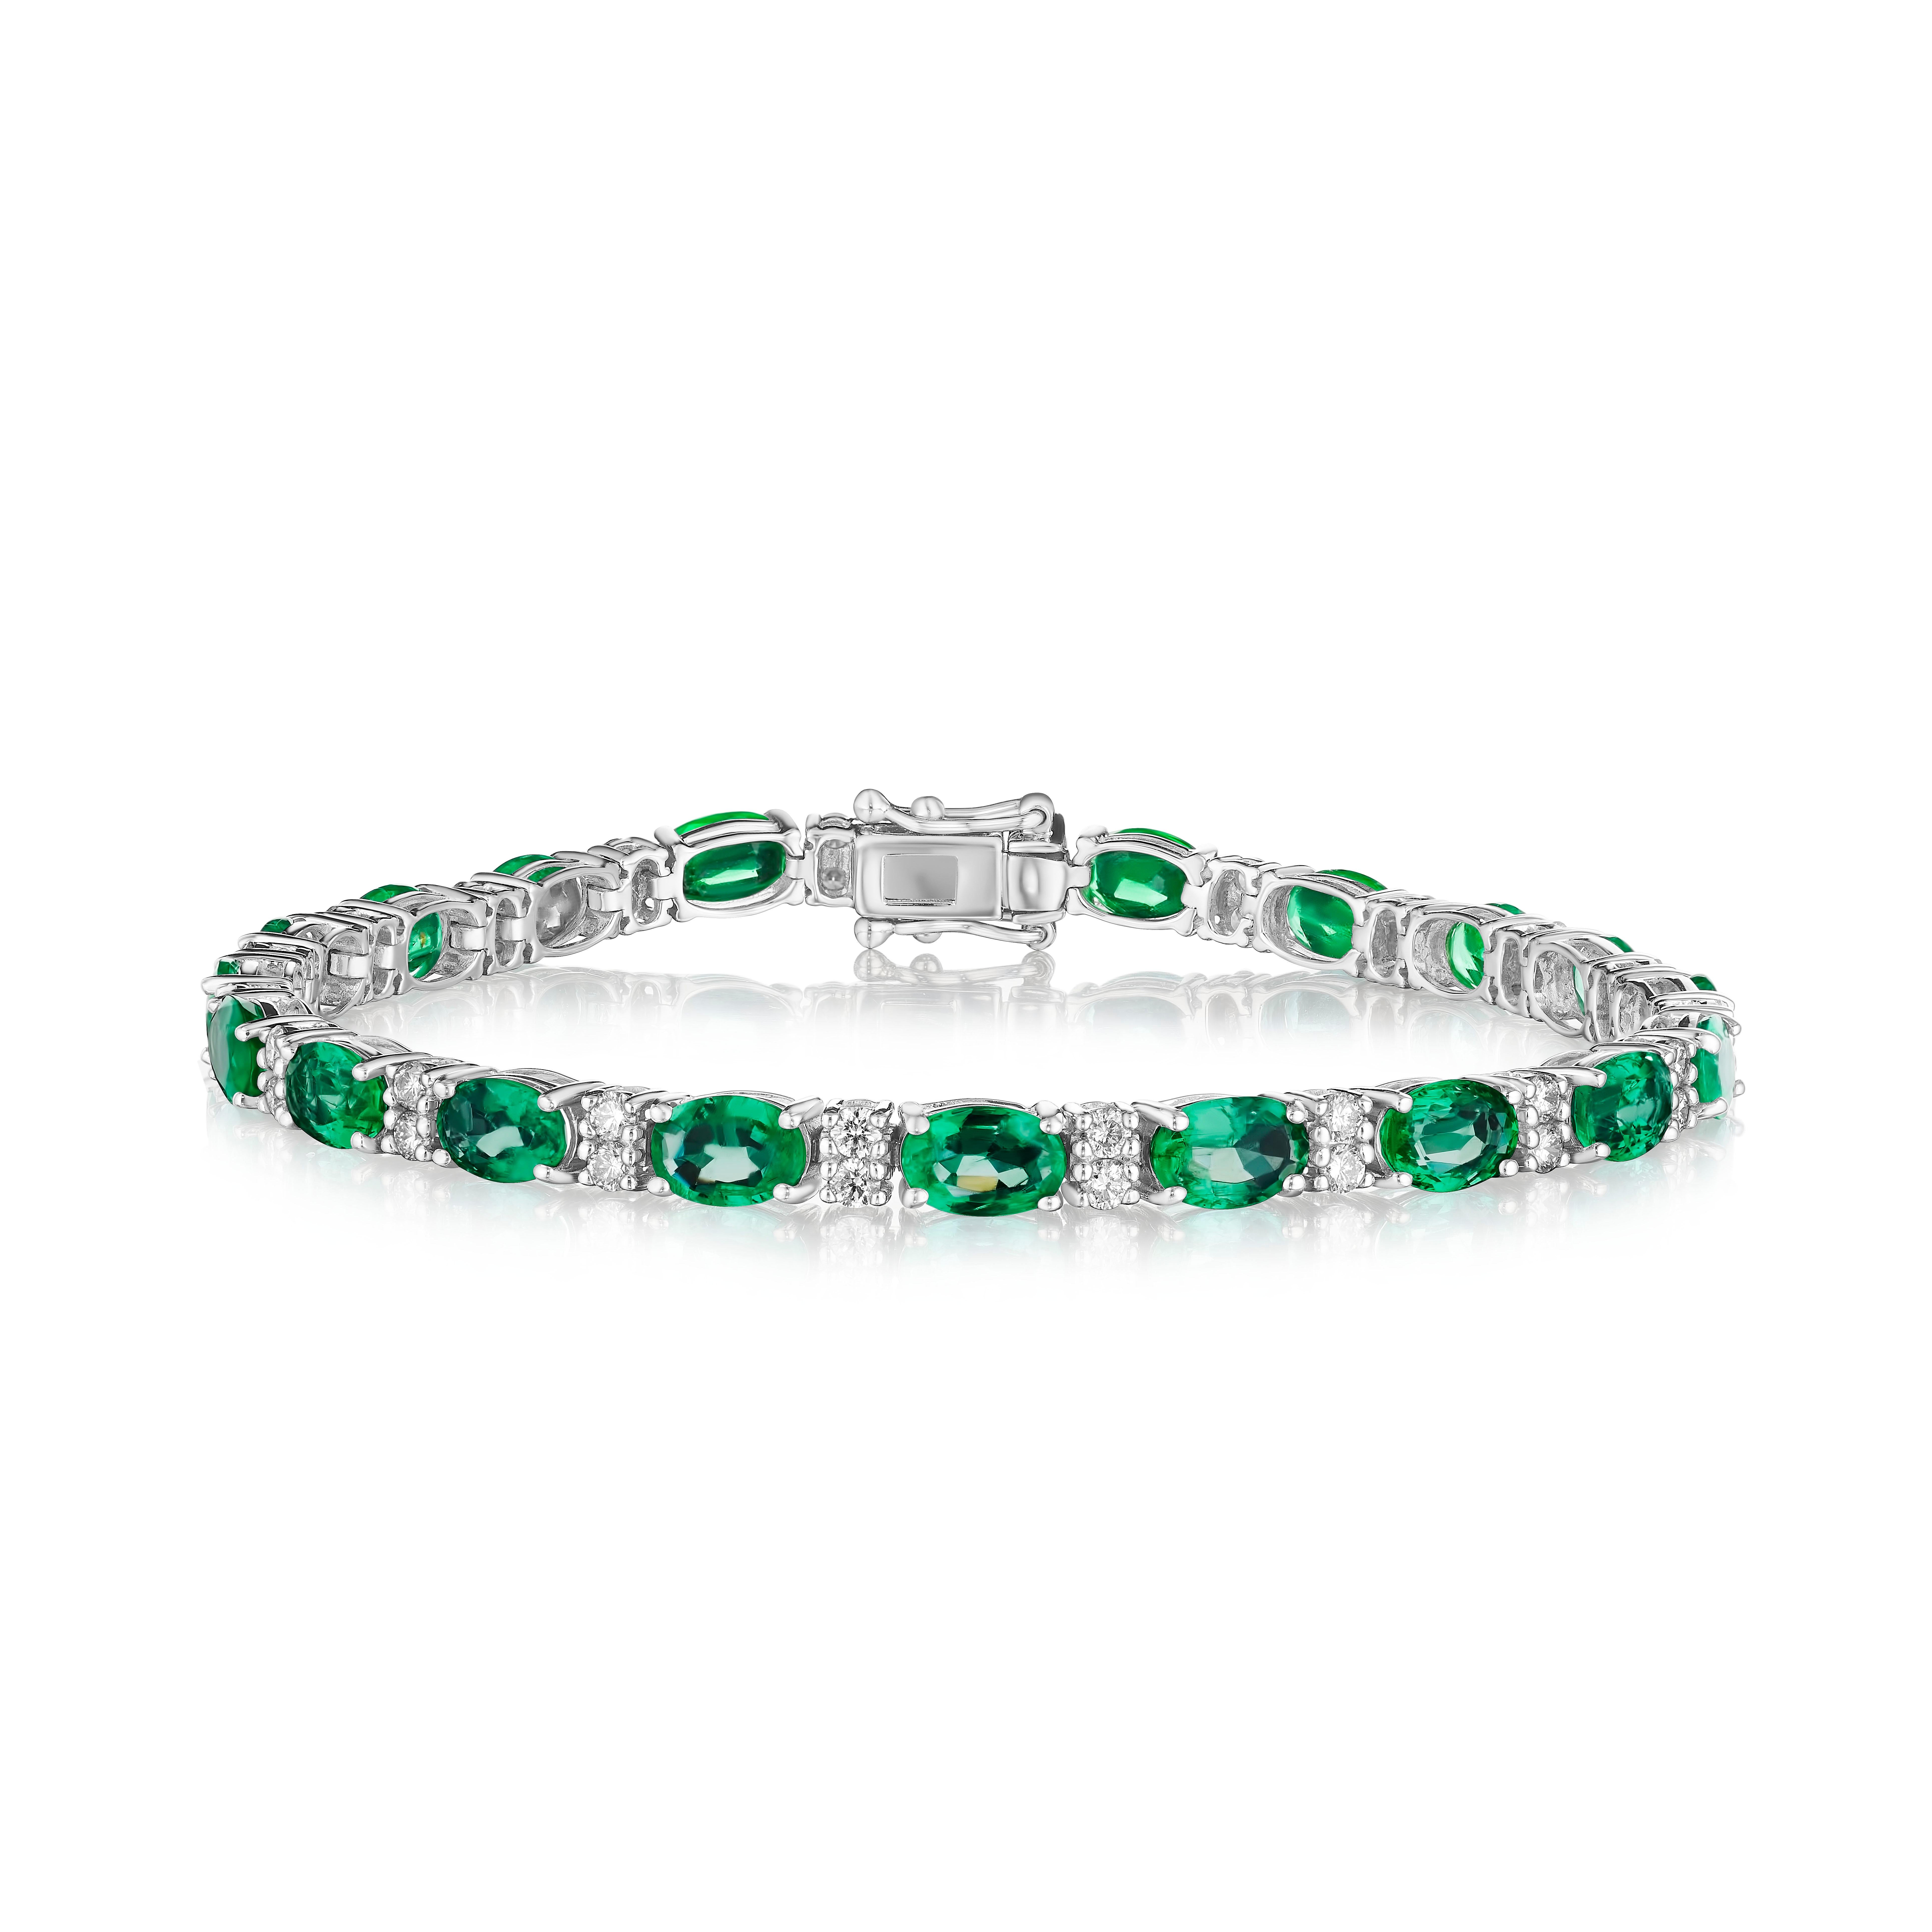 • A beautiful row of oval cut green emeralds and white round brilliant cut diamonds encircle the wrist in this bracelet, set in 14KT gold. The bracelet measures 7